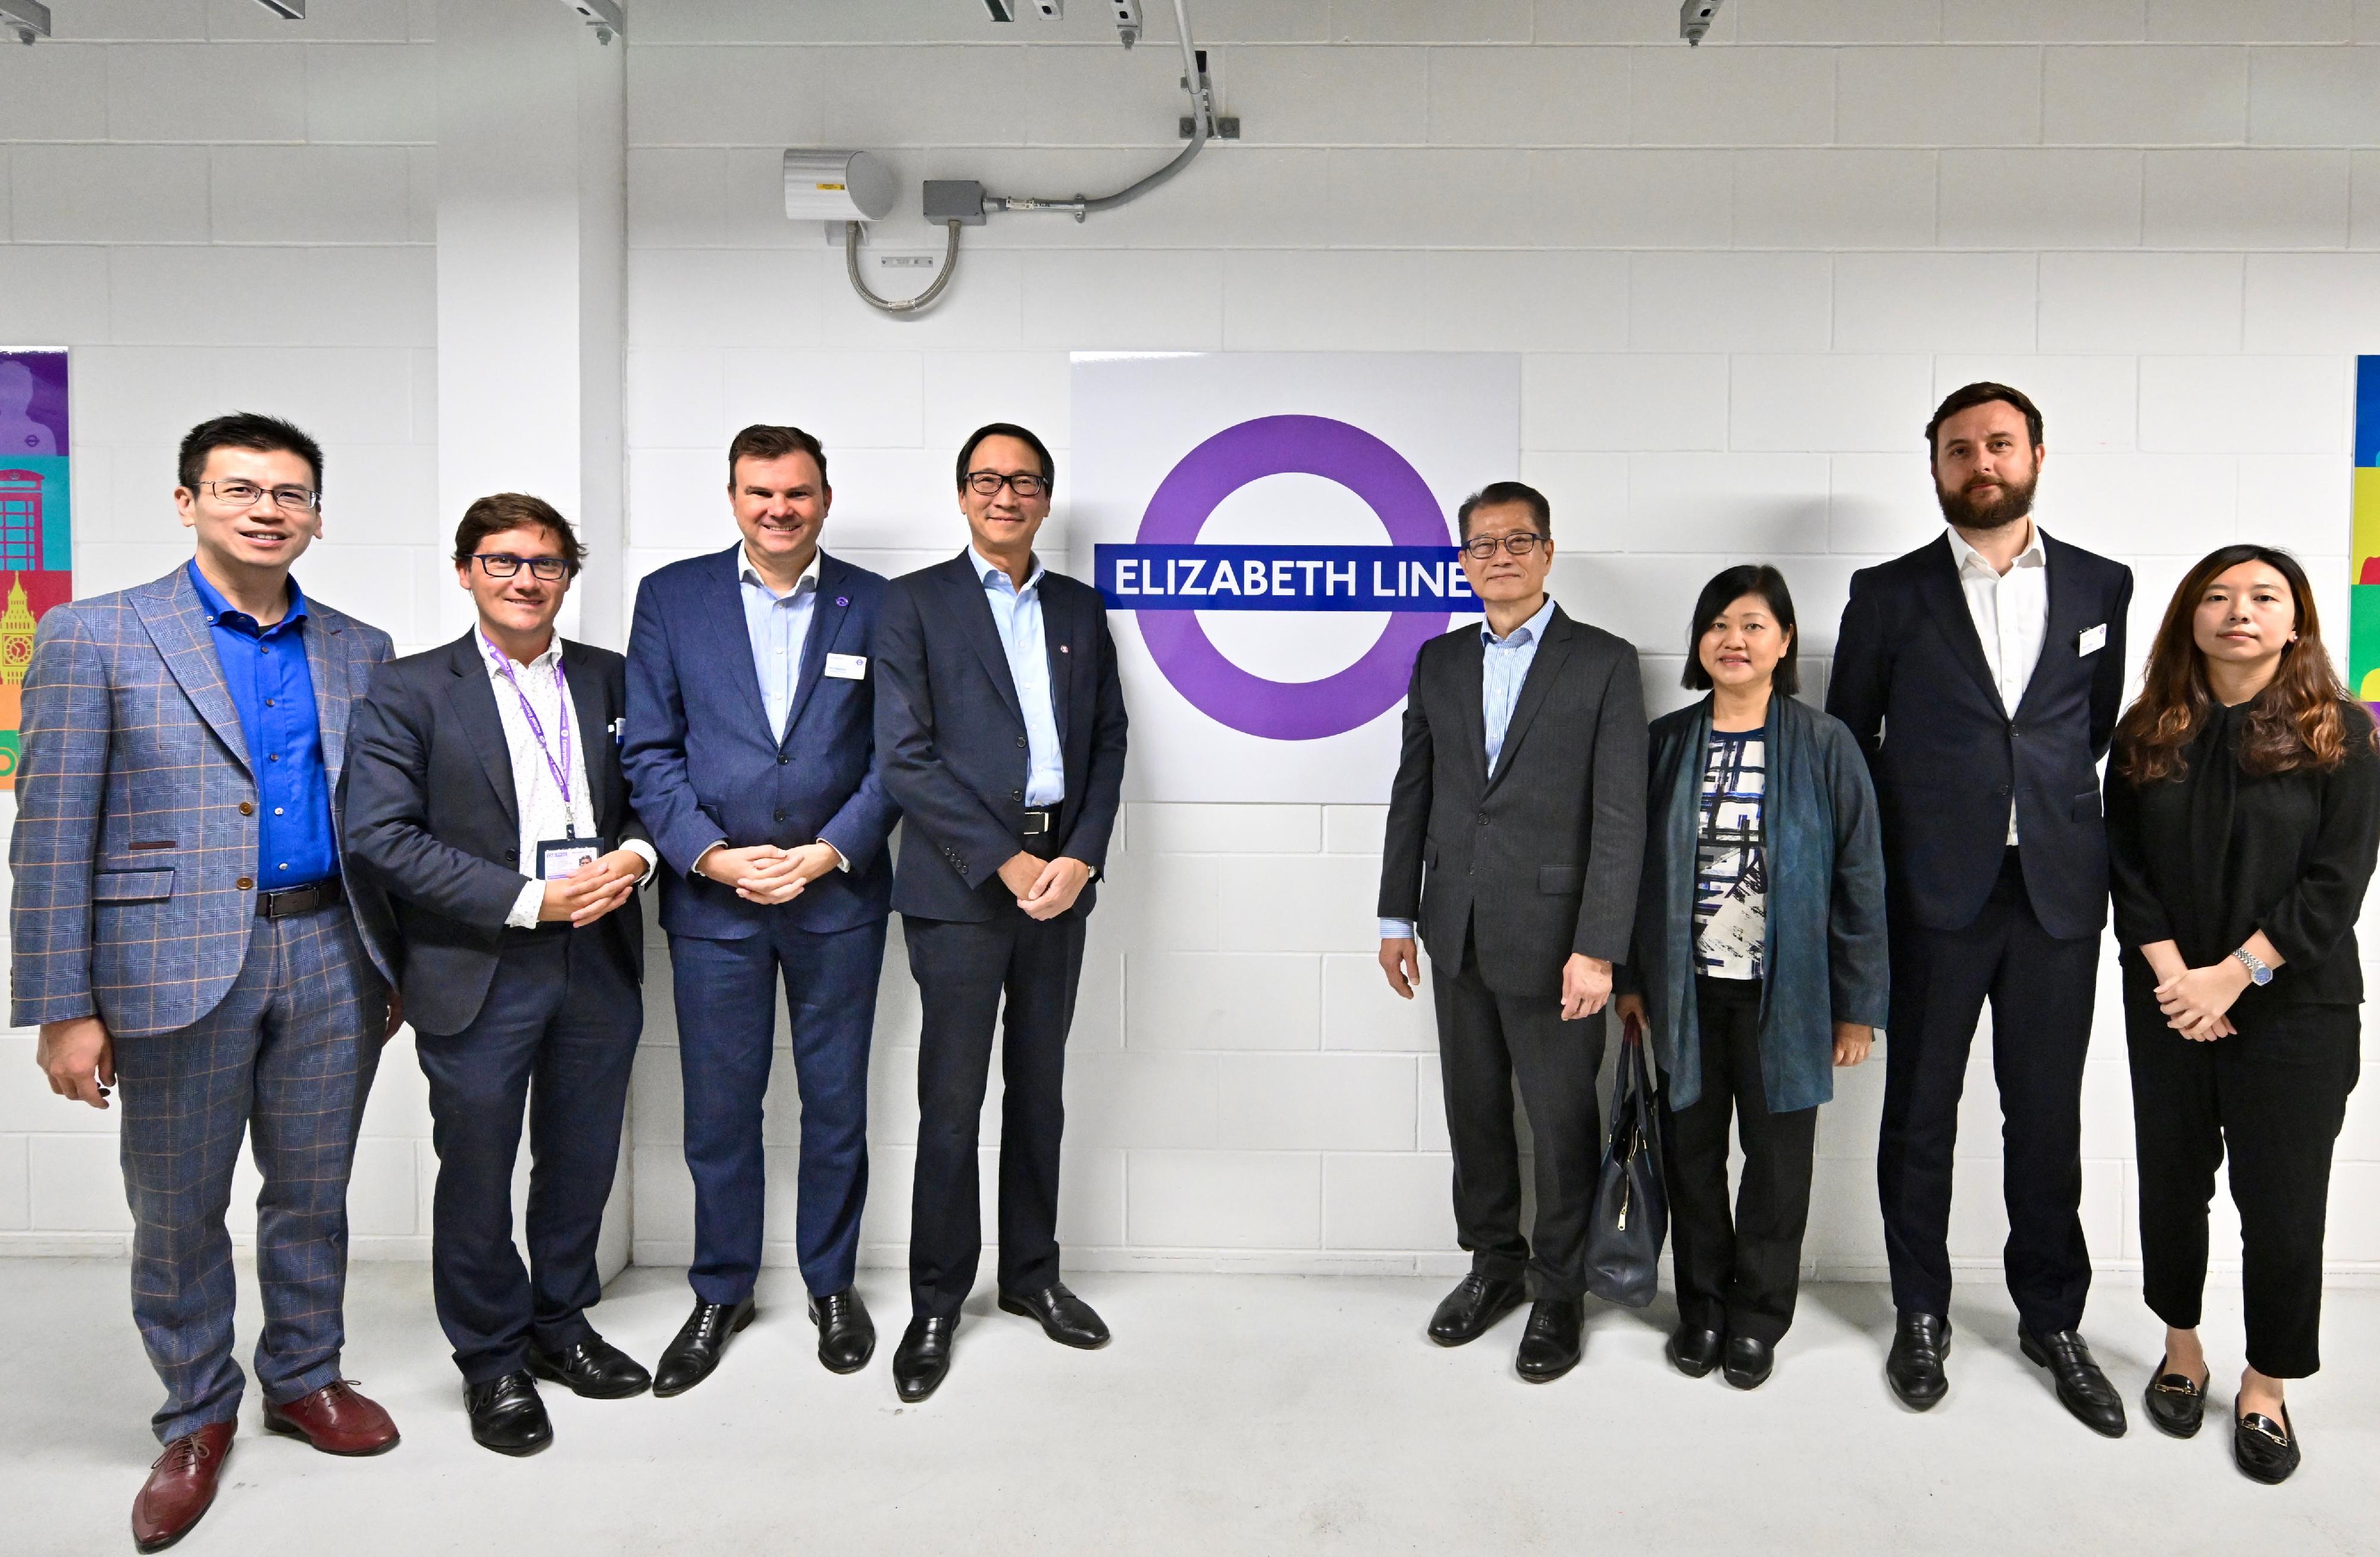 The Financial Secretary, Mr Paul Chan, continued his visit to London yesterday (September 23, London time). He visited Paddington Station in London to understand the operation of London's Elizabeth line, which is run by MTR Elizabeth line, a wholly-owned subsidiary of the MTR Corporation. Photo shows Mr Chan (fourth right) with MTR Corporation's Property and International Business Director, Mr David Tang (fourth left), and other relevant personnel.